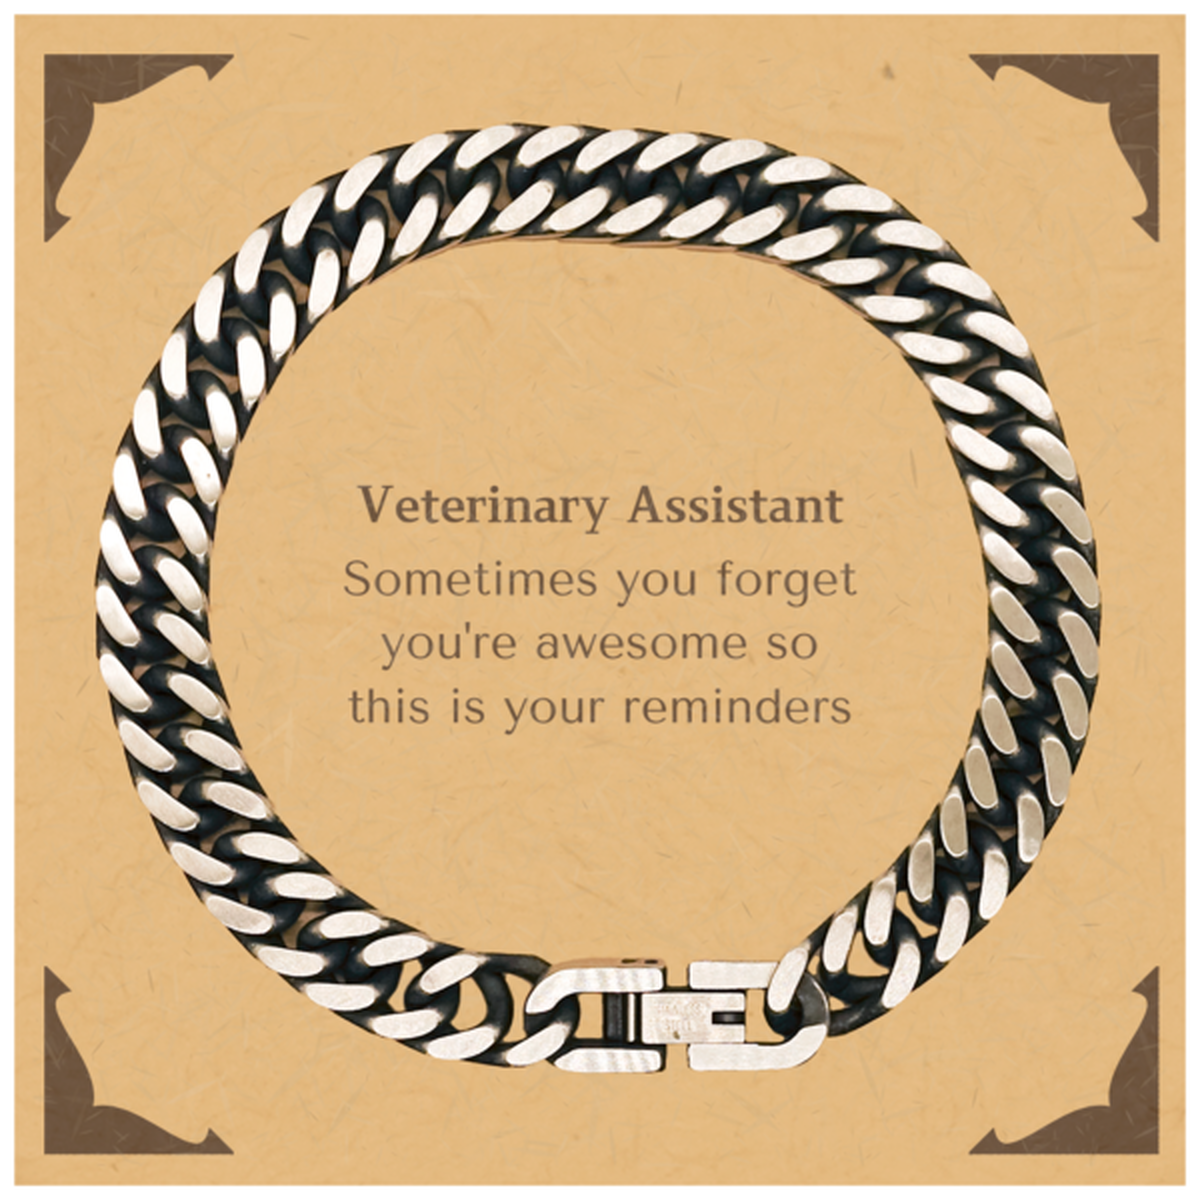 Sentimental Veterinary Assistant Cuban Link Chain Bracelet, Veterinary Assistant Sometimes you forget you're awesome so this is your reminders, Graduation Christmas Birthday Gifts for Veterinary Assistant, Men, Women, Coworkers